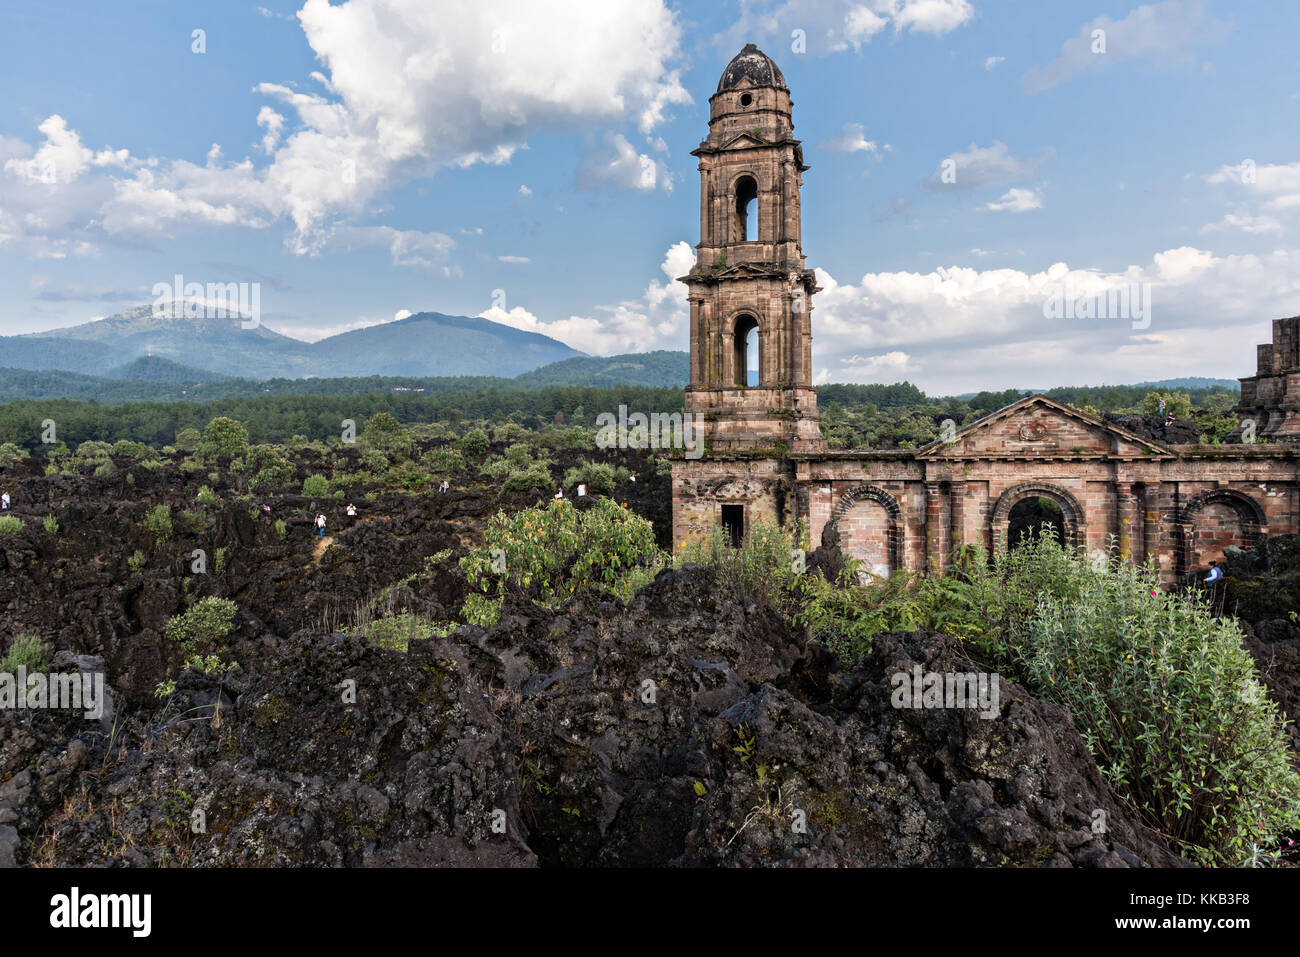 The steeple of San Juan Parangaricutiro church pokes up out of a sea of dried lava rock in the remote village of San Juan Parangaricutiro, Michoacan, Mexico. This church is the only remaining structure left buried in the eight-year eruption of the Paricutin volcano which consumed two villages in 1943 and covered the region in lava and ash. Stock Photo